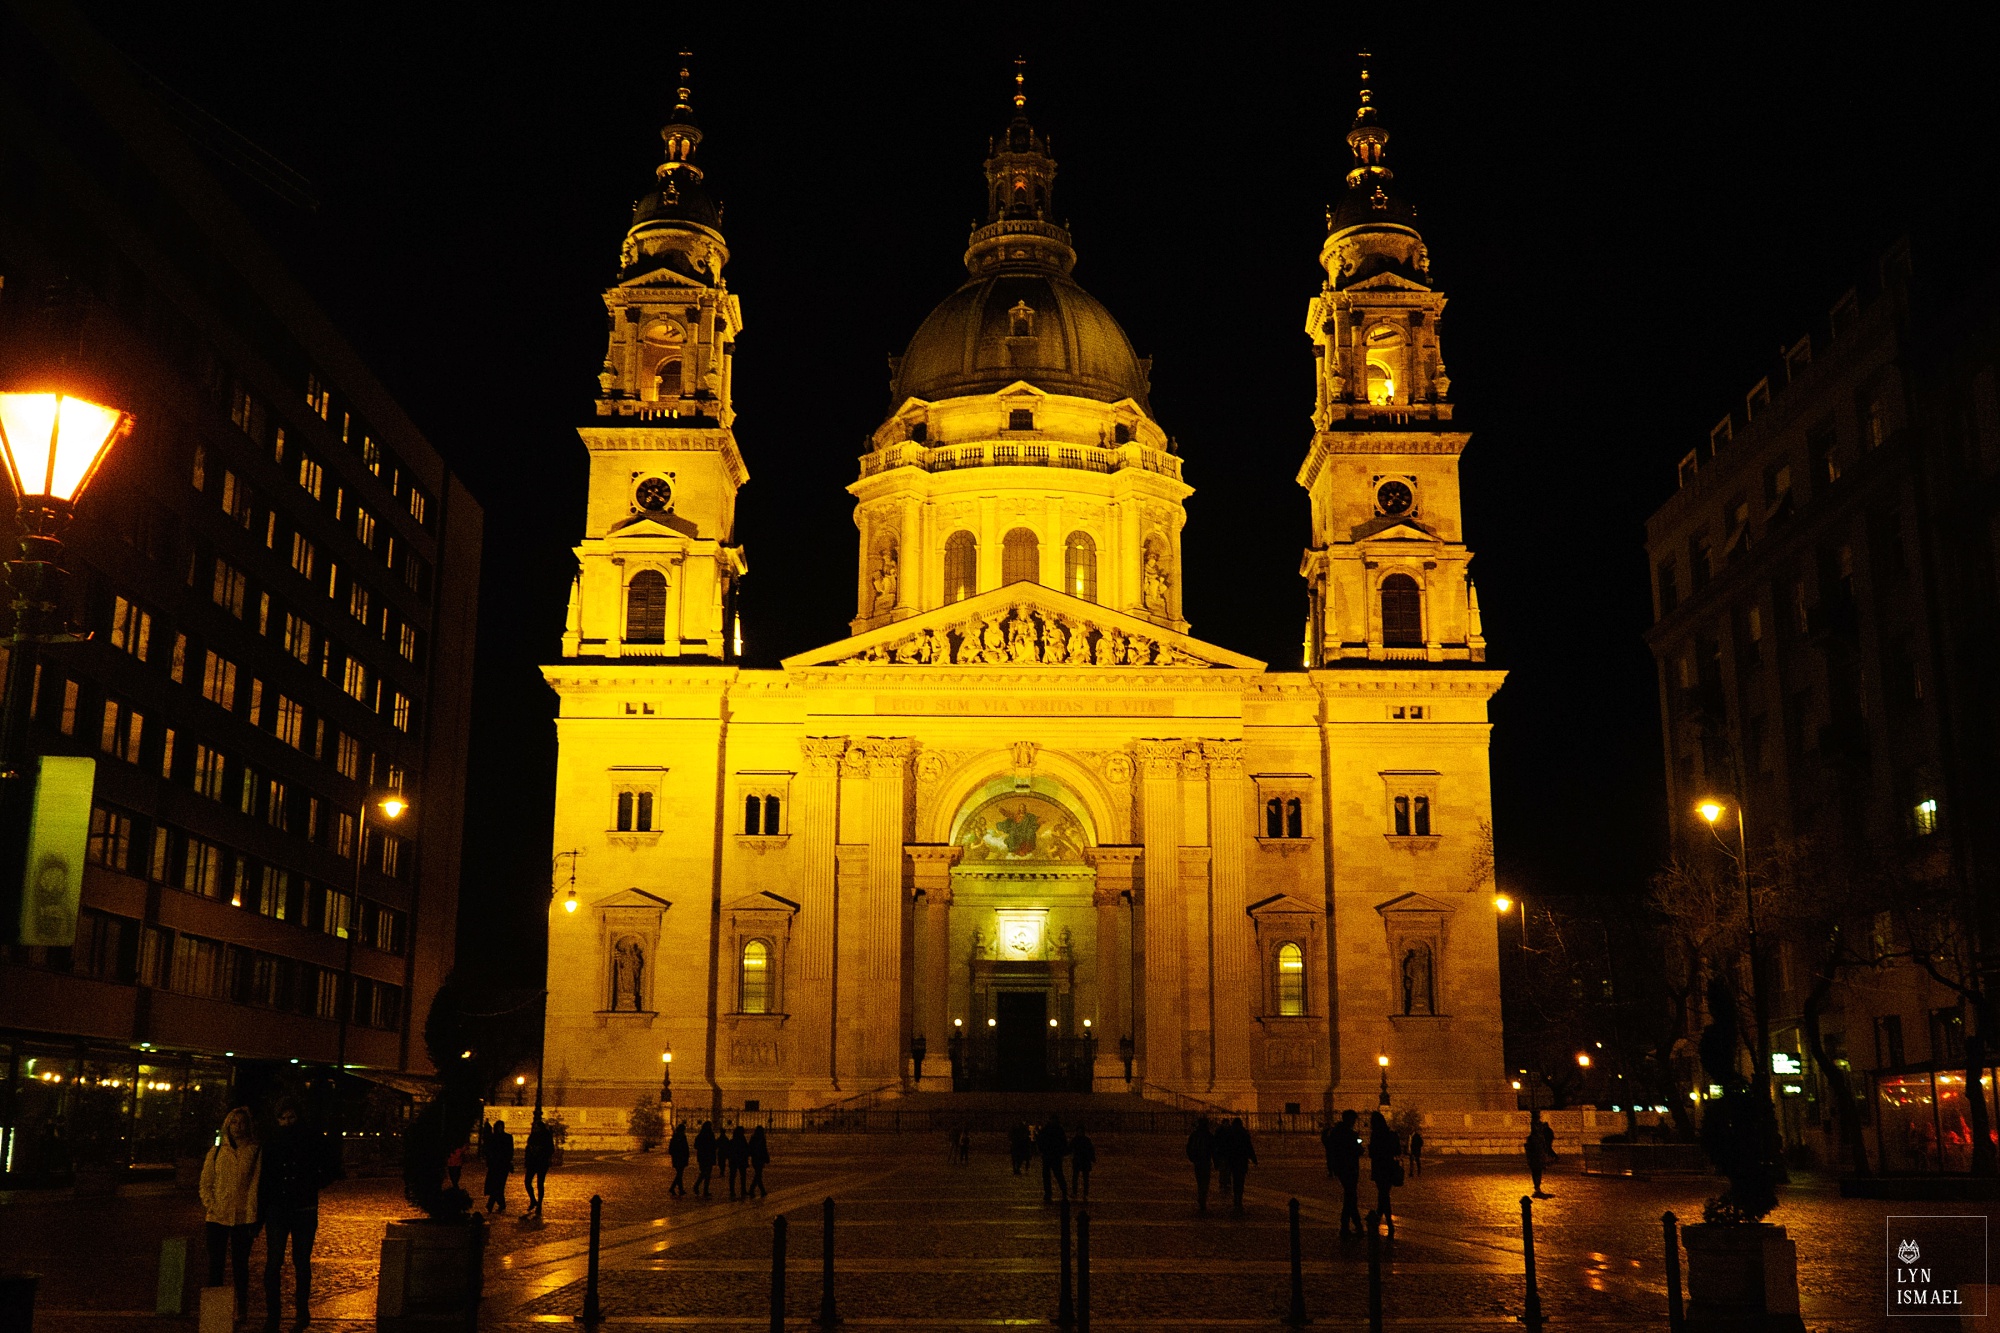 St Stephen's Basilica in Budapest at night